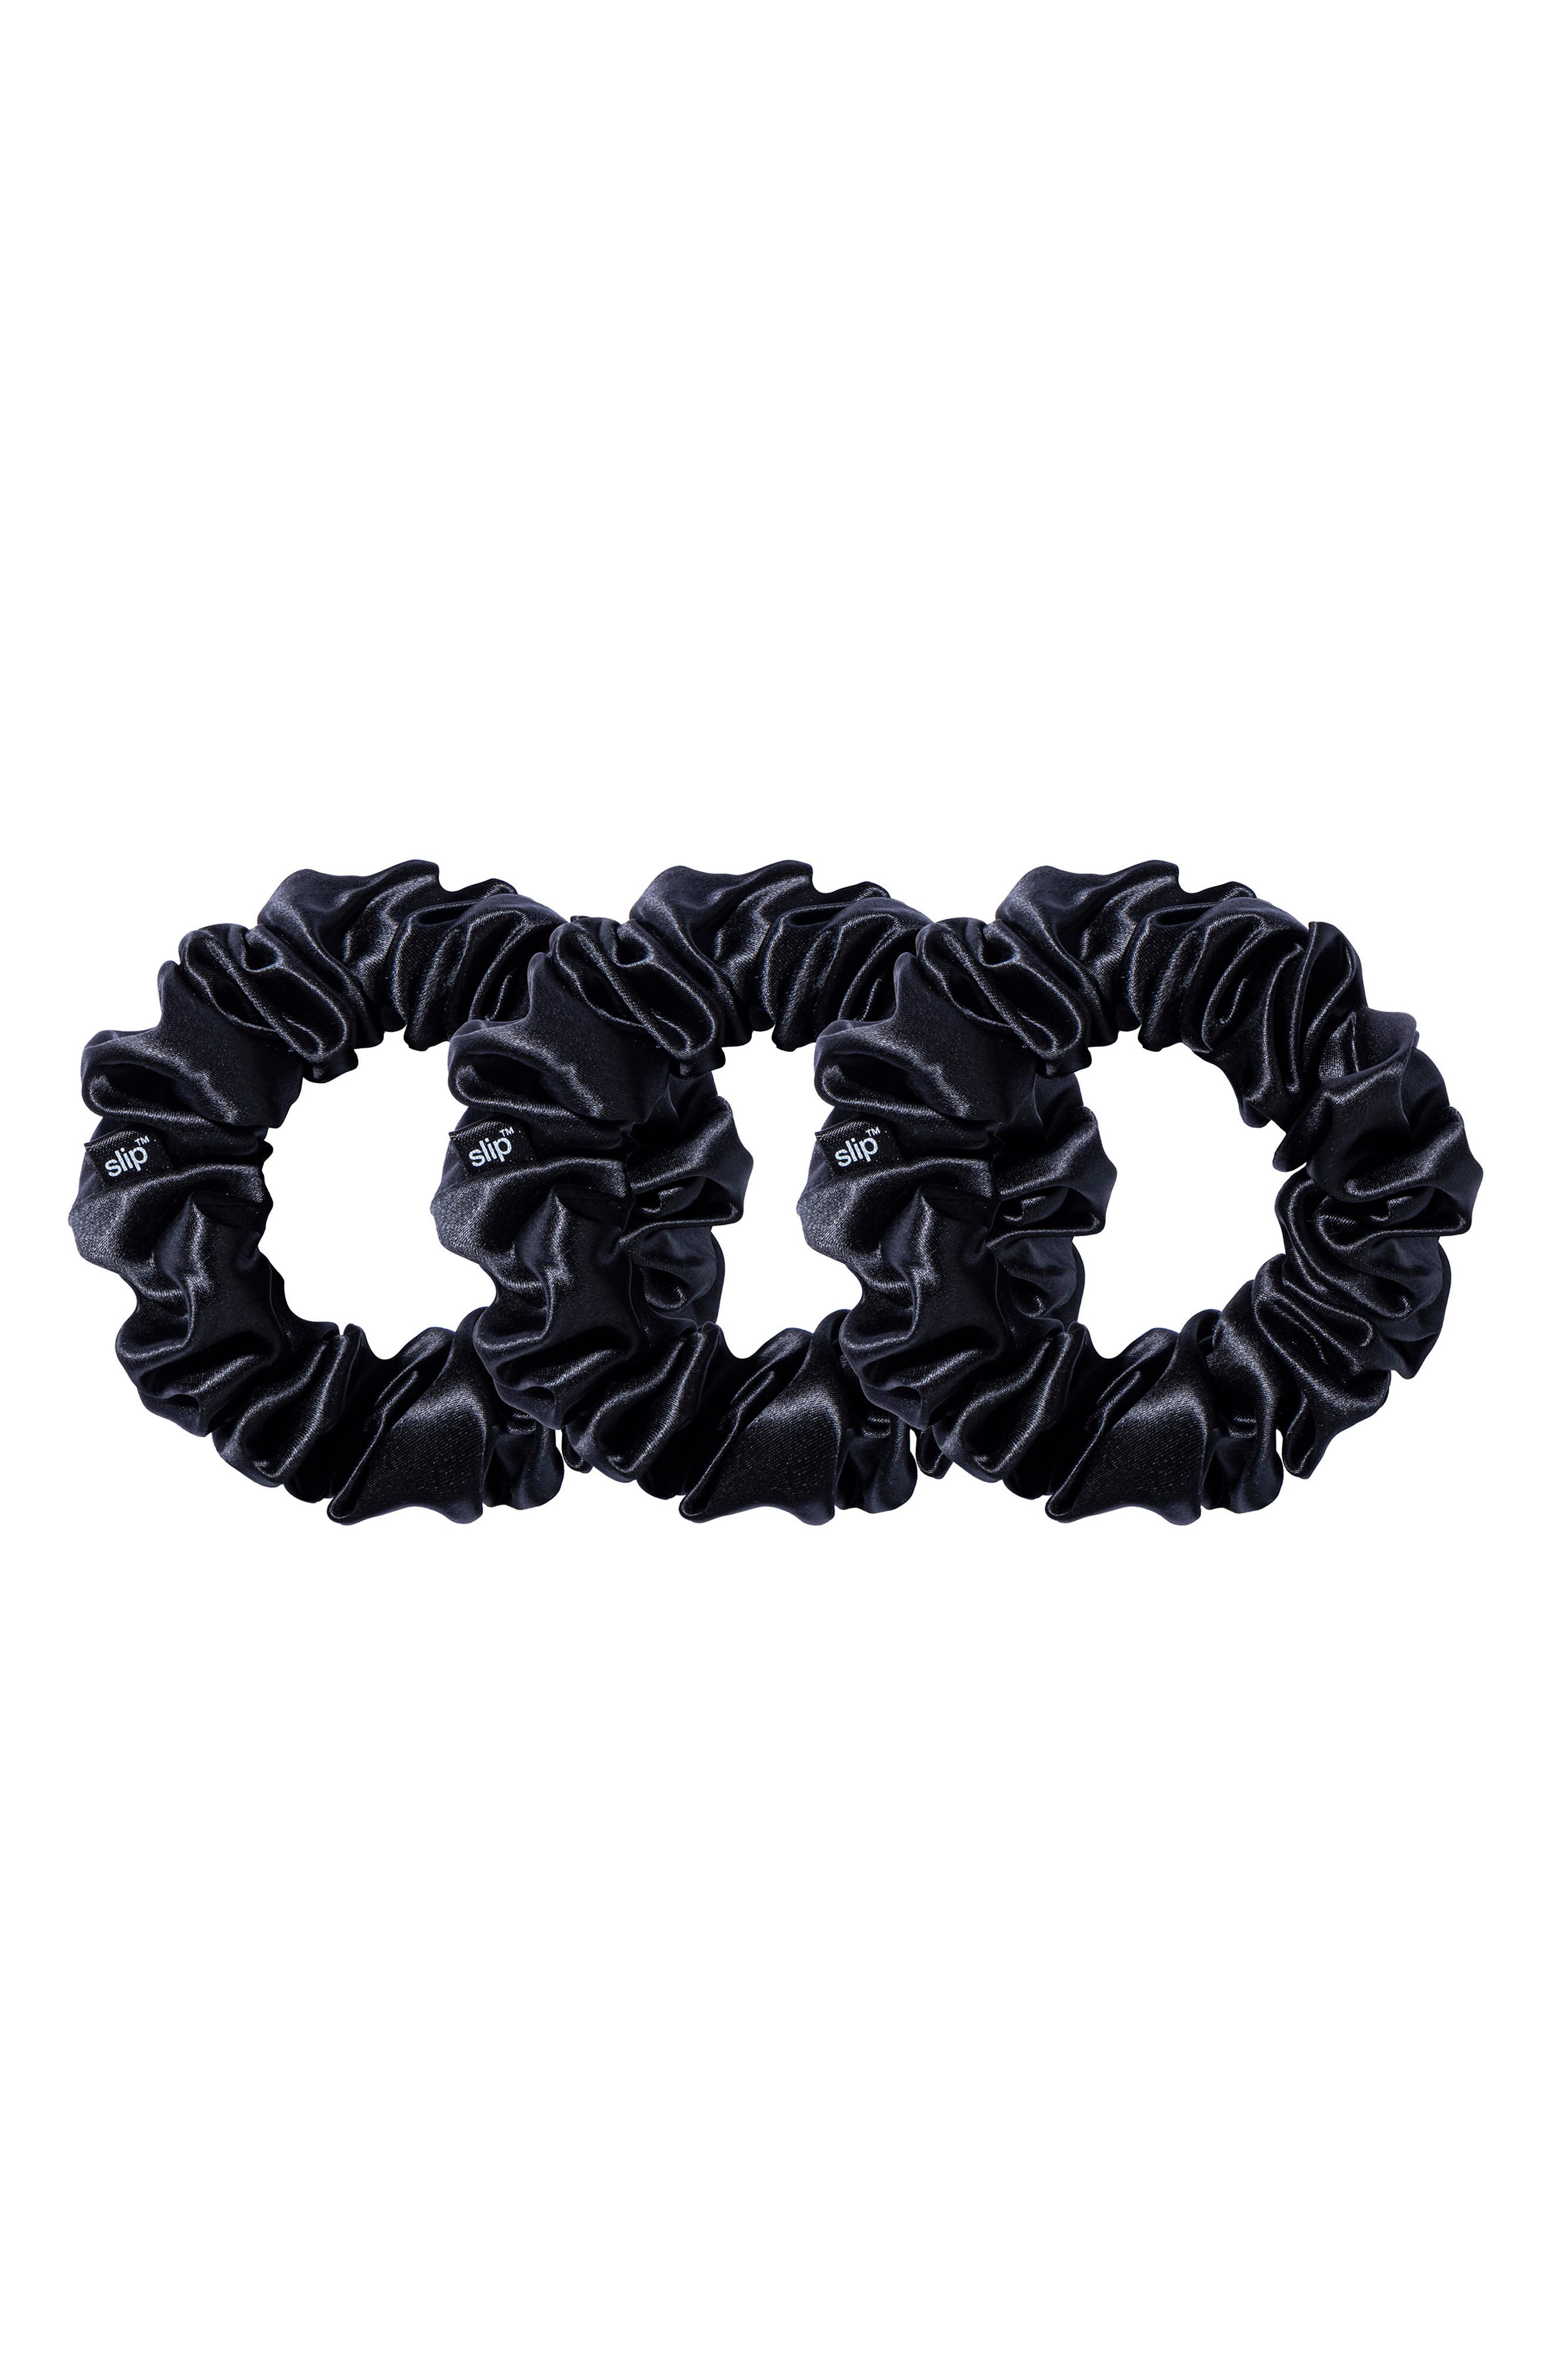 Woman Hair Accessories Hair Ties 100/% Cotton Scrunchie Gift for Her Set of 2 Hair Elastic Scrunchies